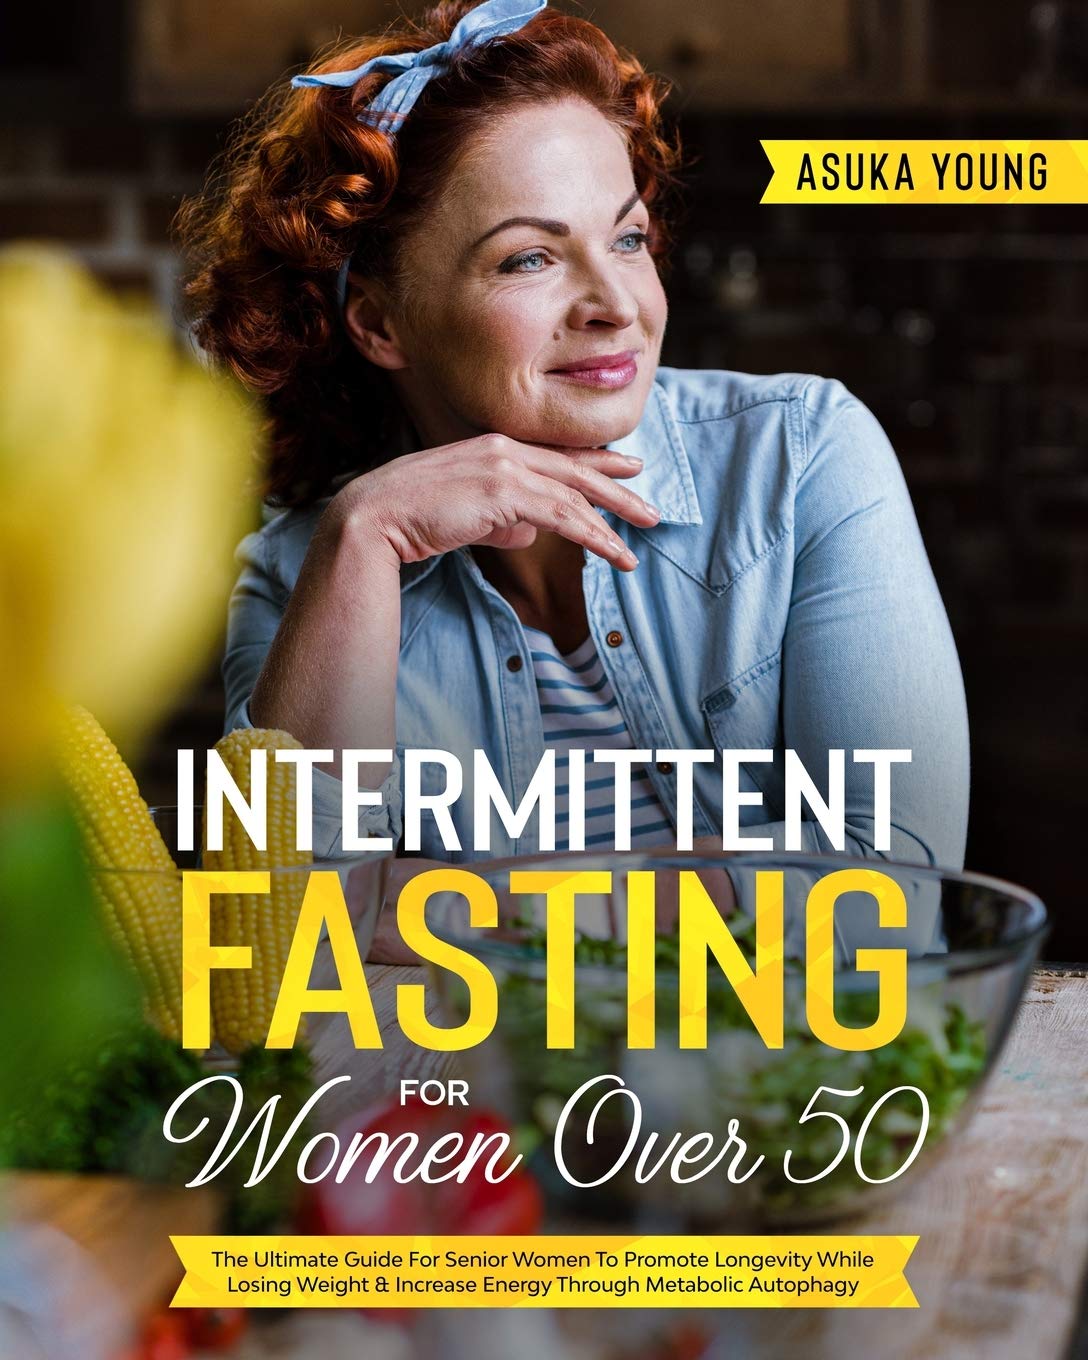 Intermittent Fasting For Women Over 50: The Ultimate Guide For Senior Women To Promote Longevity While Losing Weight & Increase Energy Through Metabolic Autophagy